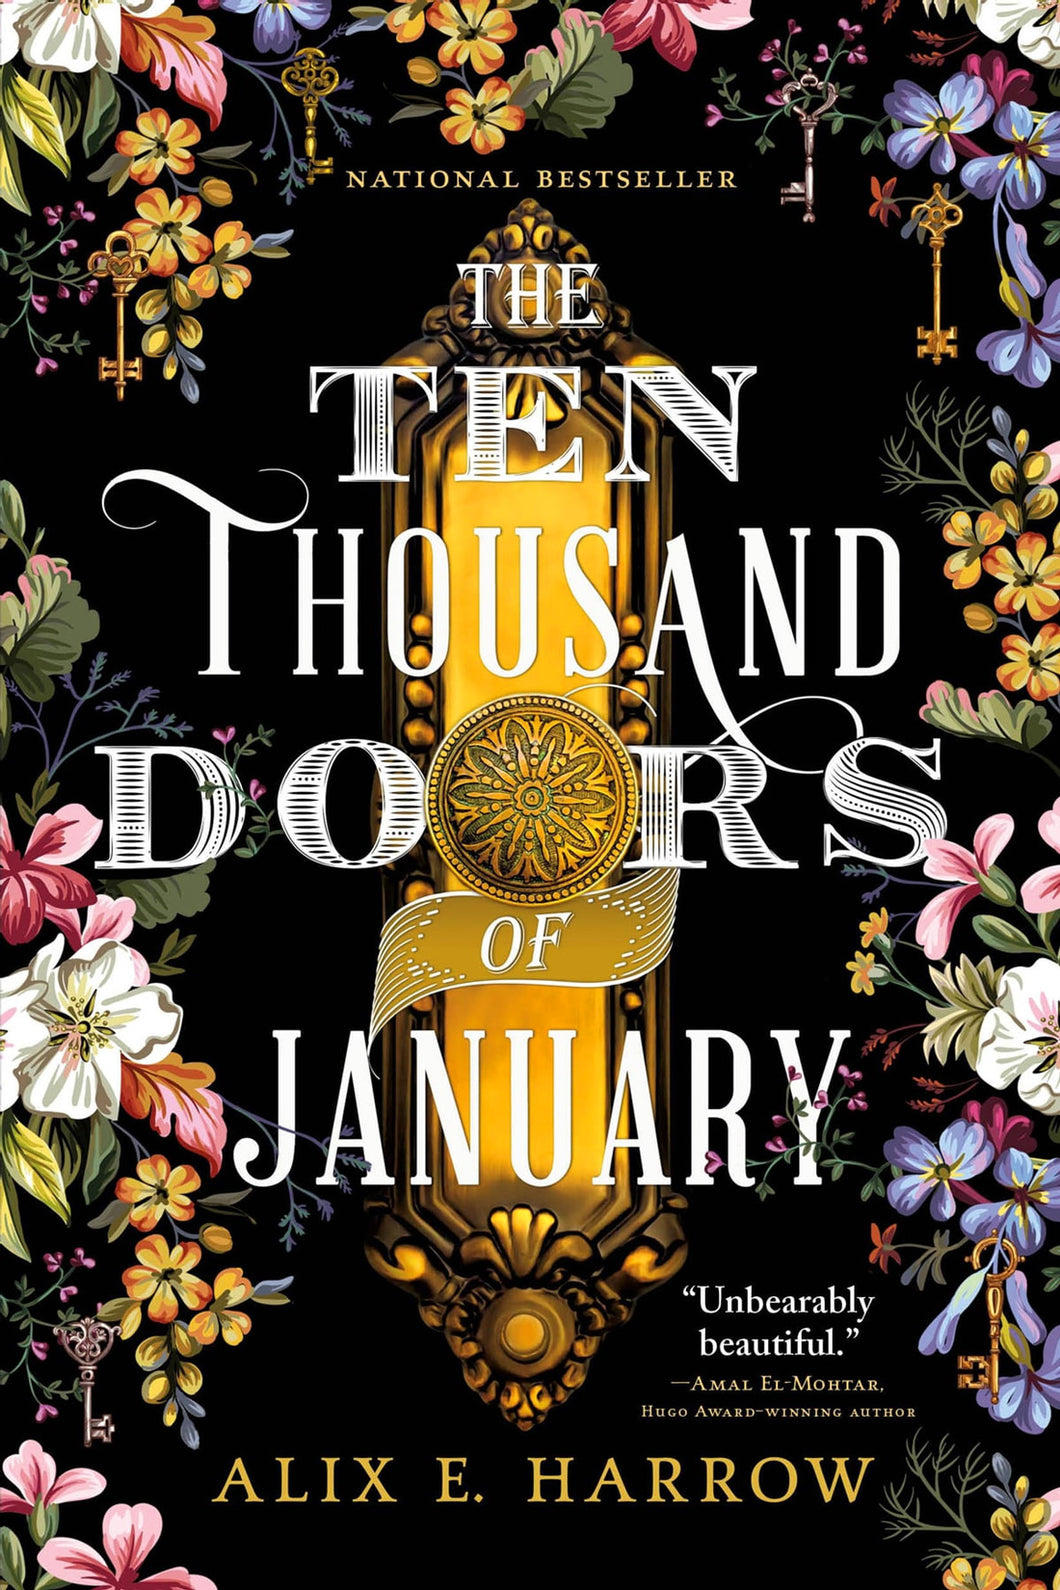 The Ten Thousand Doors of January by Alix E. Harrow / Hardcover or Paperback - NEW BOOK OR BOOK BOX